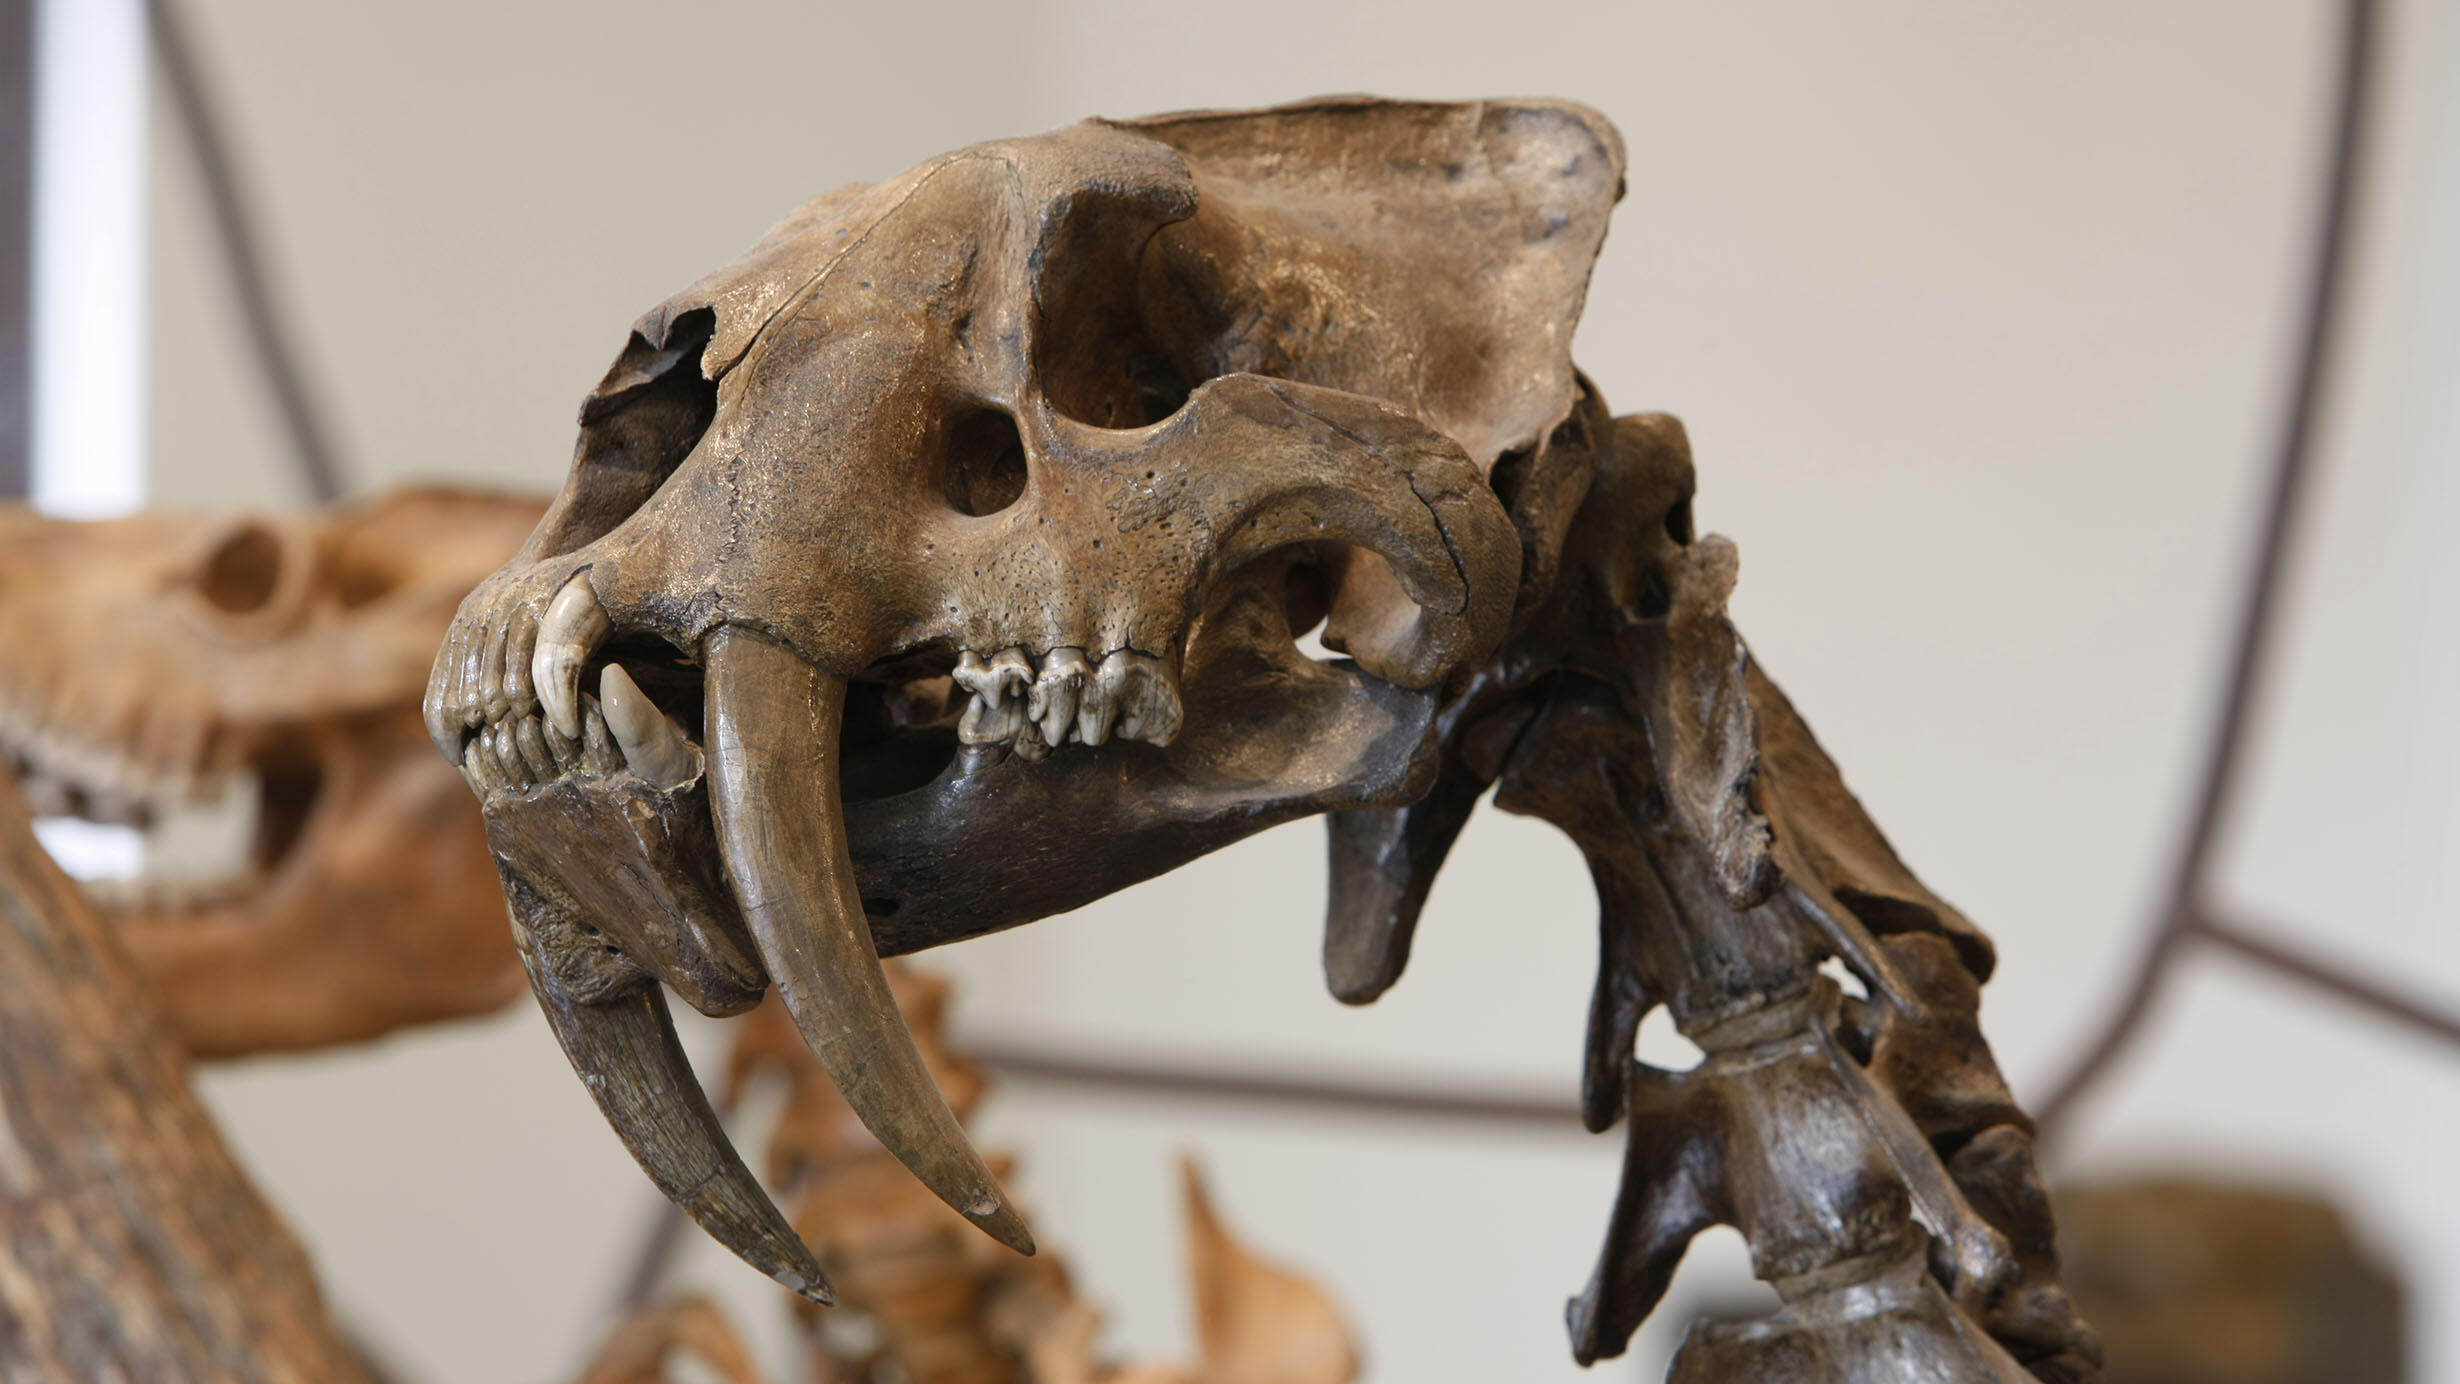 Closeup of the fossil mount of the saber-toothed cat, Smilodon, focuses on its extremely long canines.